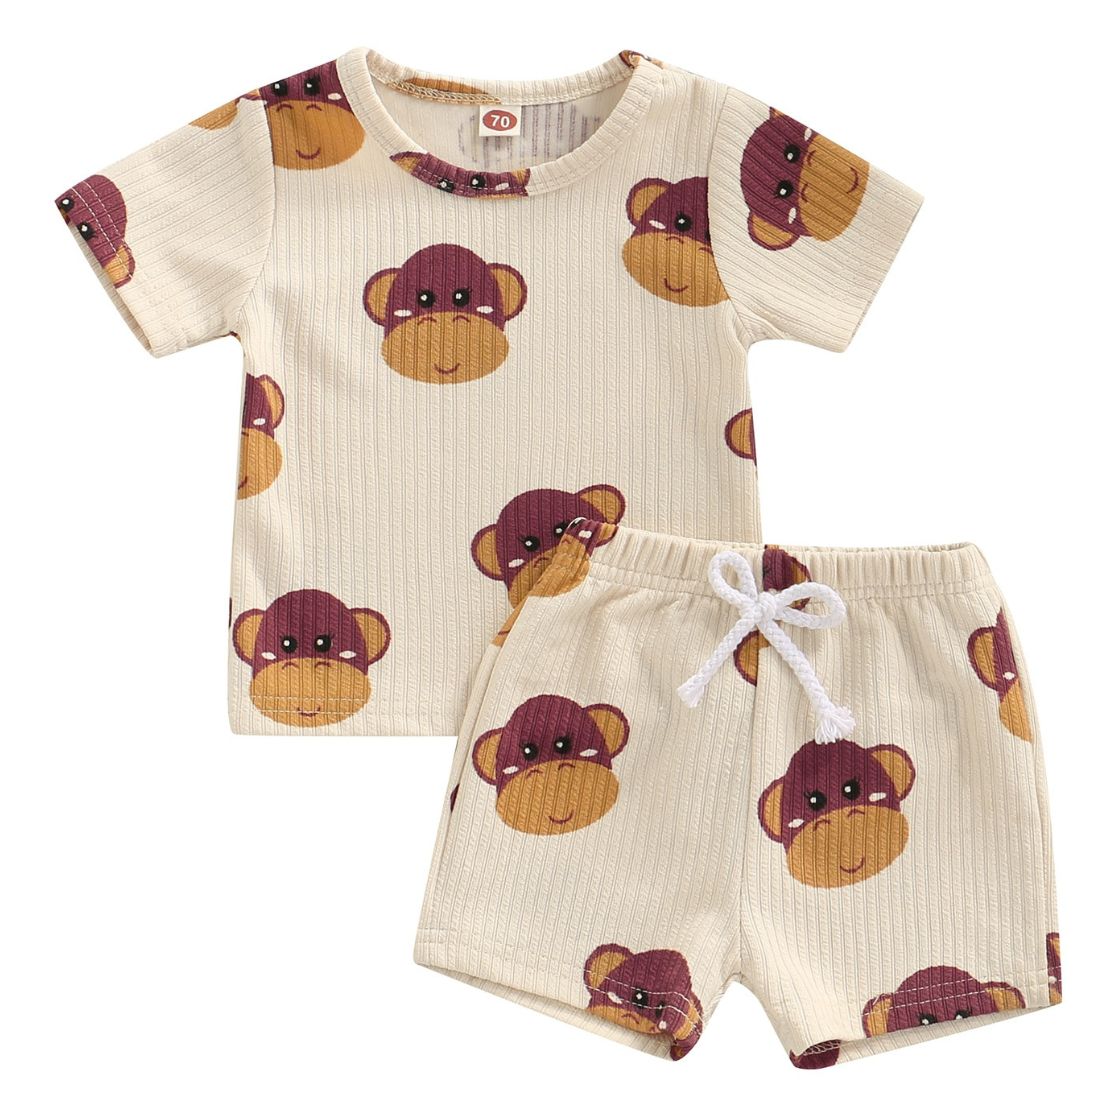 Ribbed T-Shirt and Shorts with Monkey head print 2 piece Baby Clothing Set